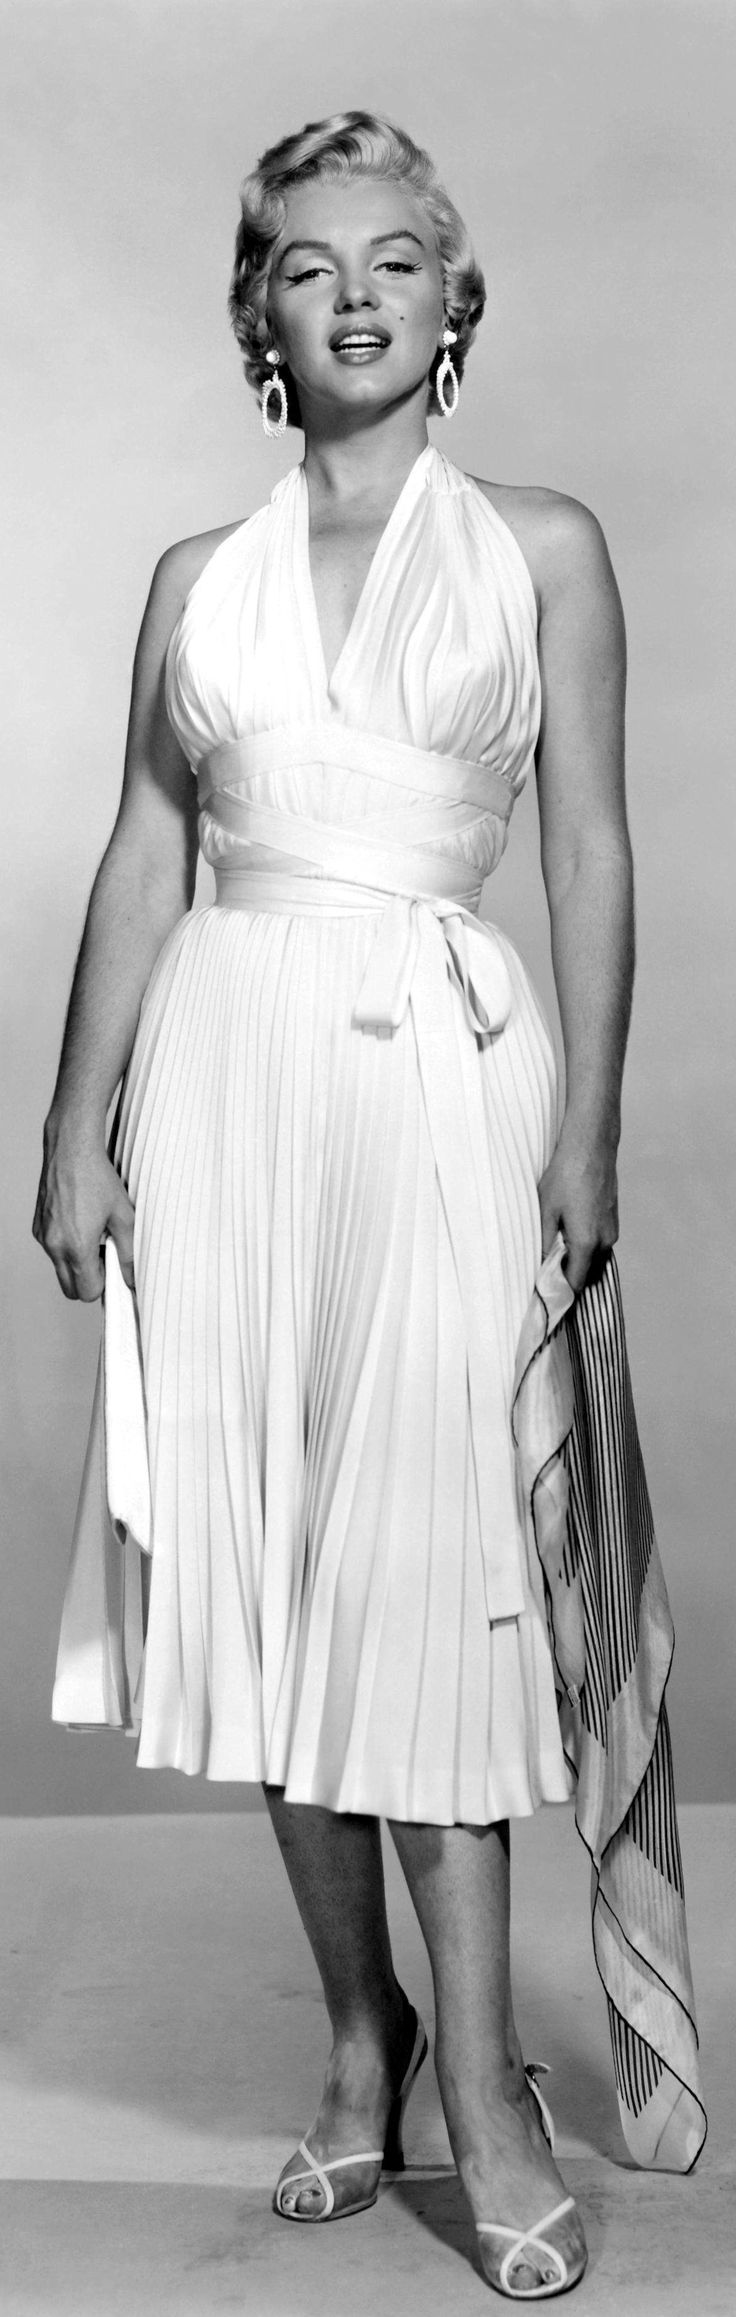 Marilyn Monroe in an iconic white dress from "The Seven Year Itch," 1955.